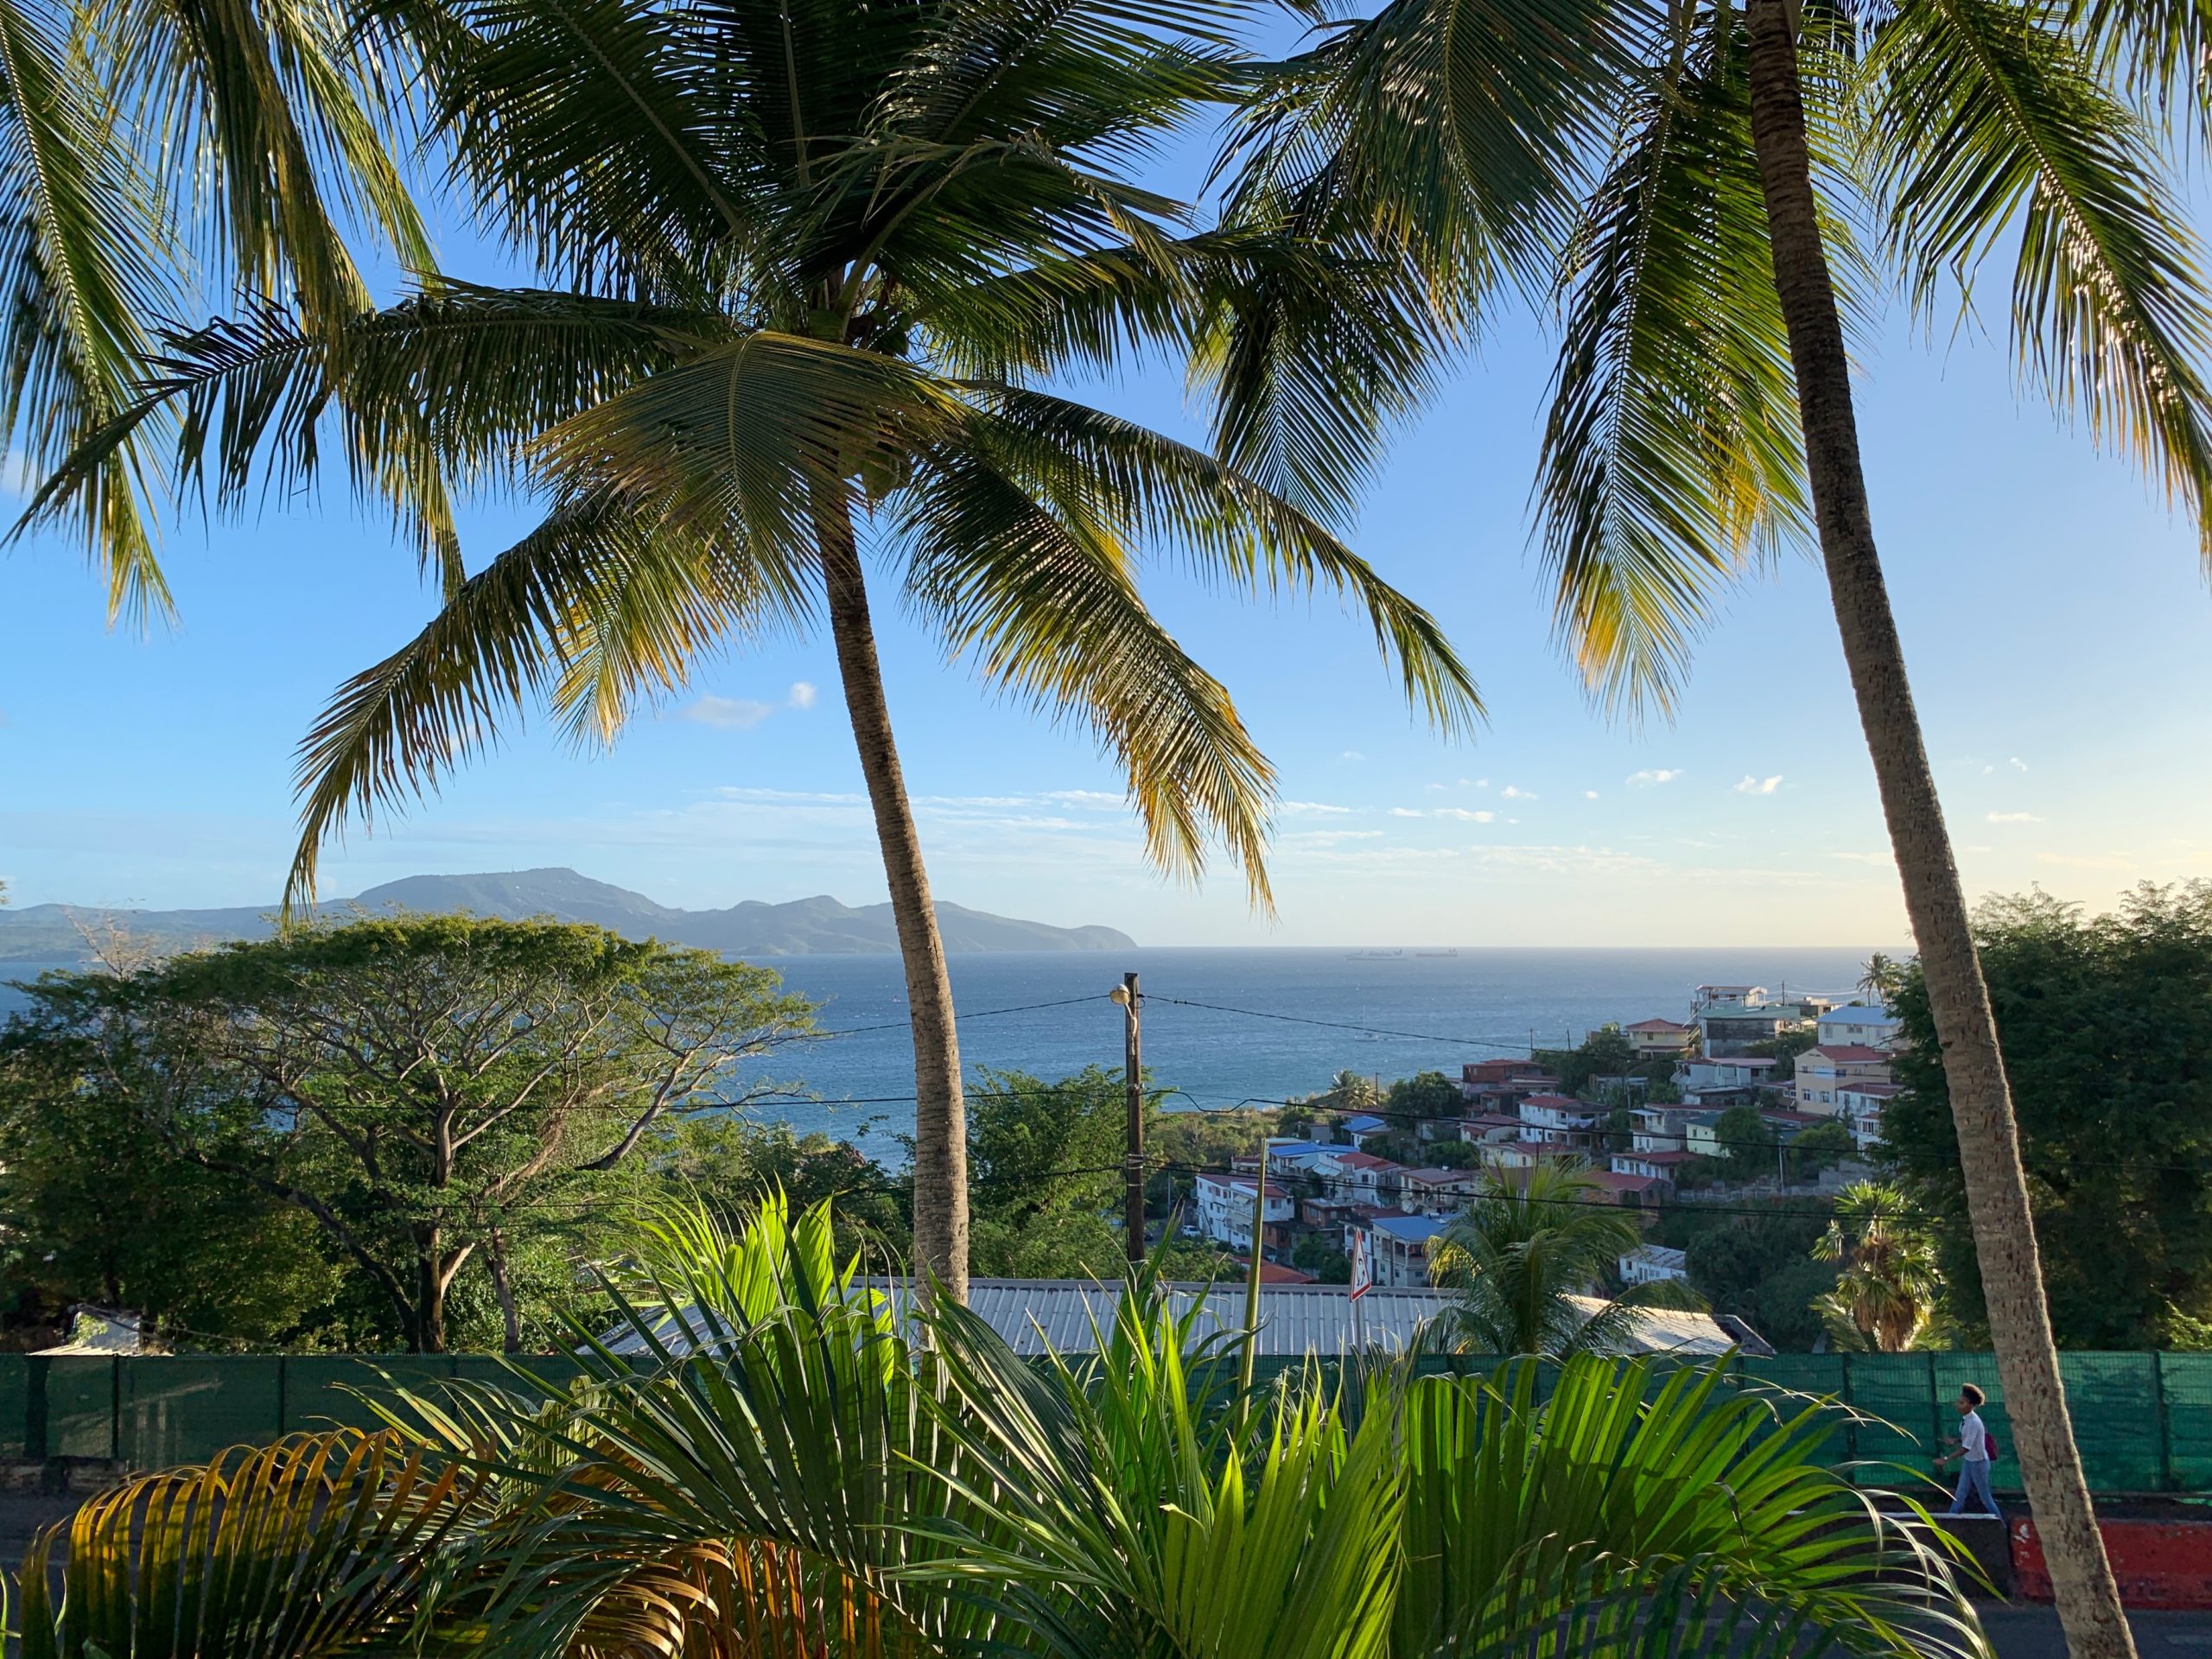 View of palm trees overlooking the bay in Fort-de-France, Martinique